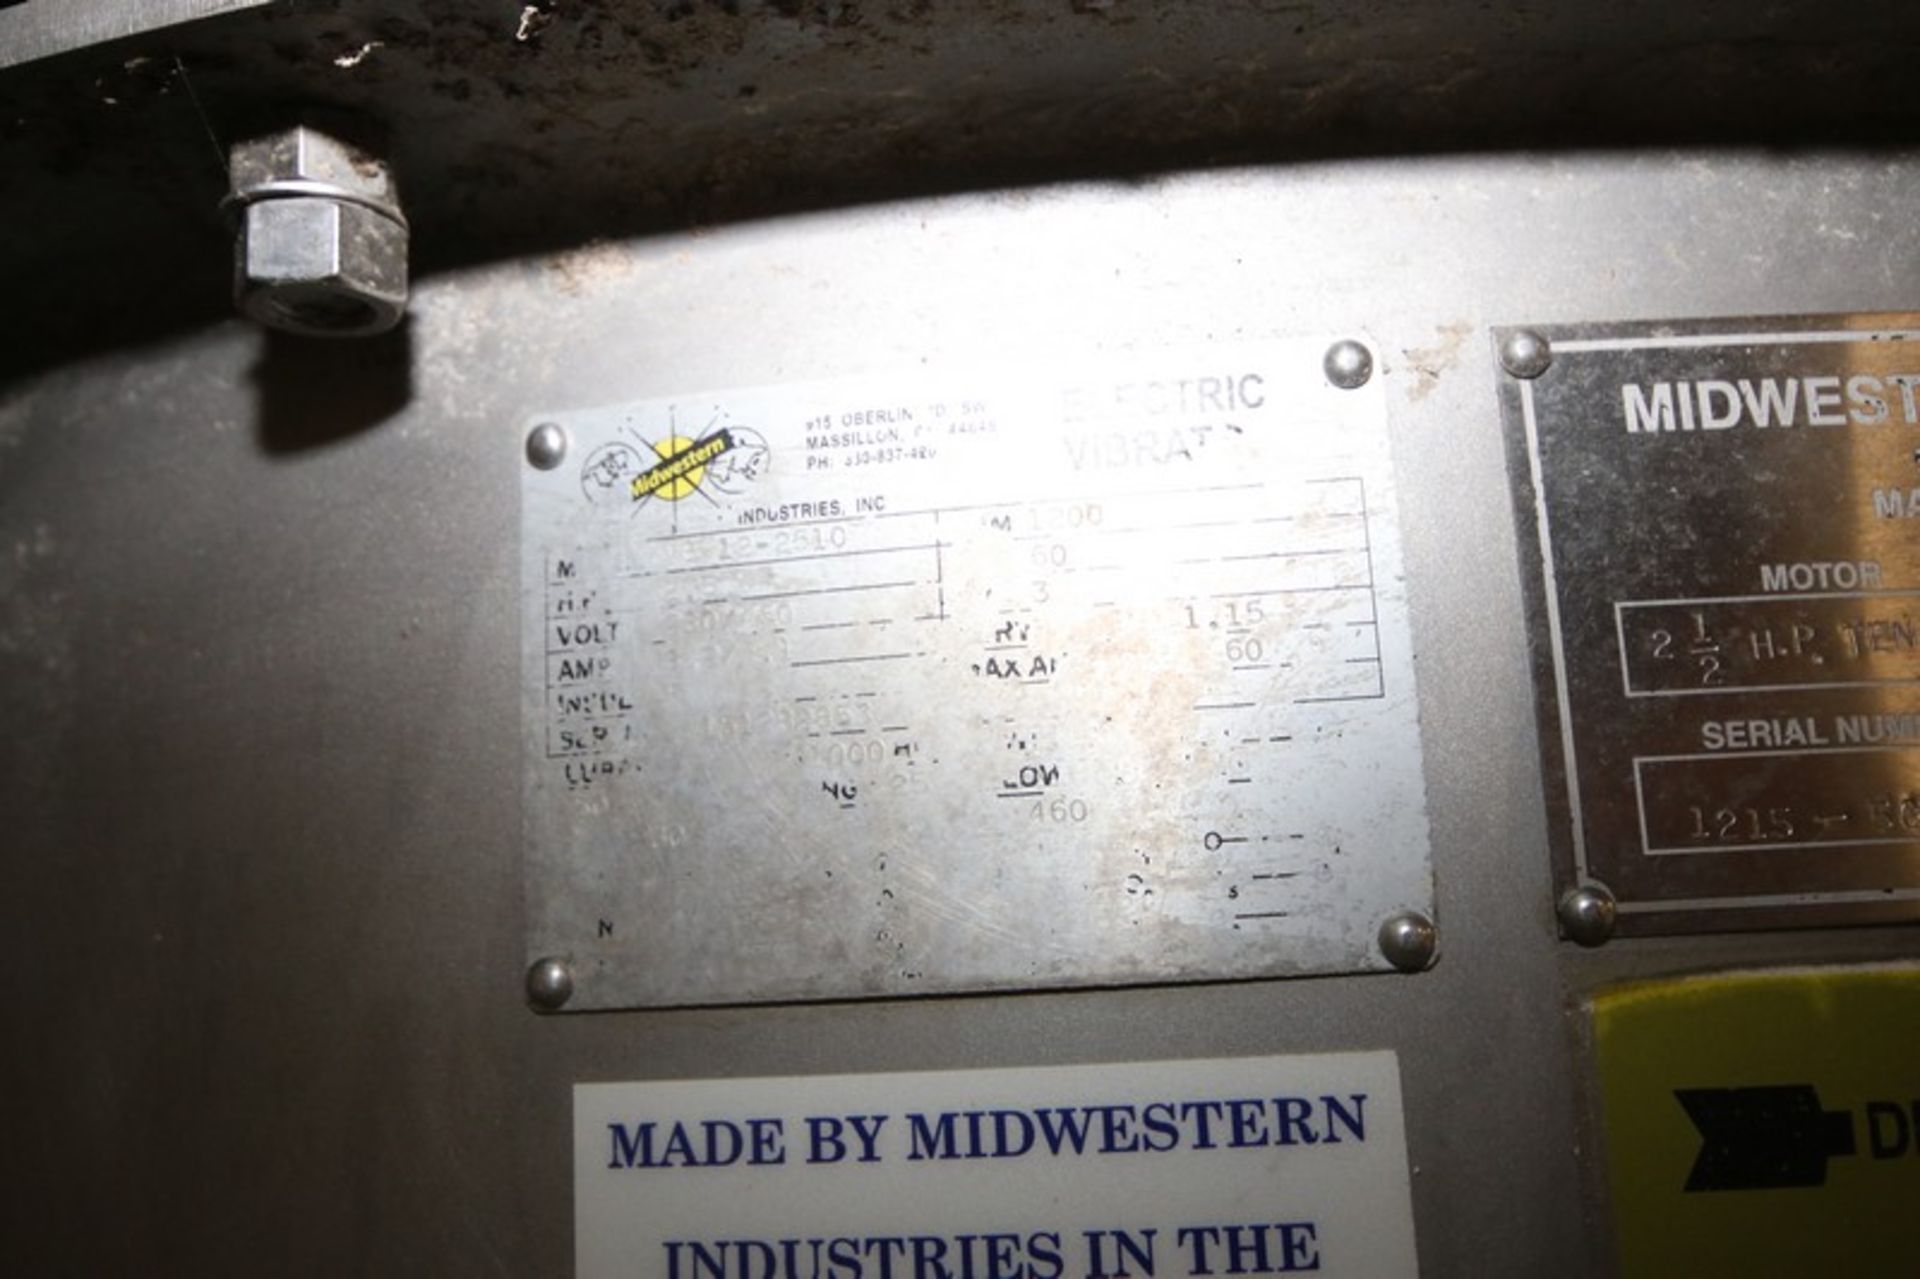 Midwestern Industries 60" S/S Vibratory Sifter,Model MR60S8-, S/N 1215-5044, 2.5 hp/1200rpm, 230/ - Image 2 of 12